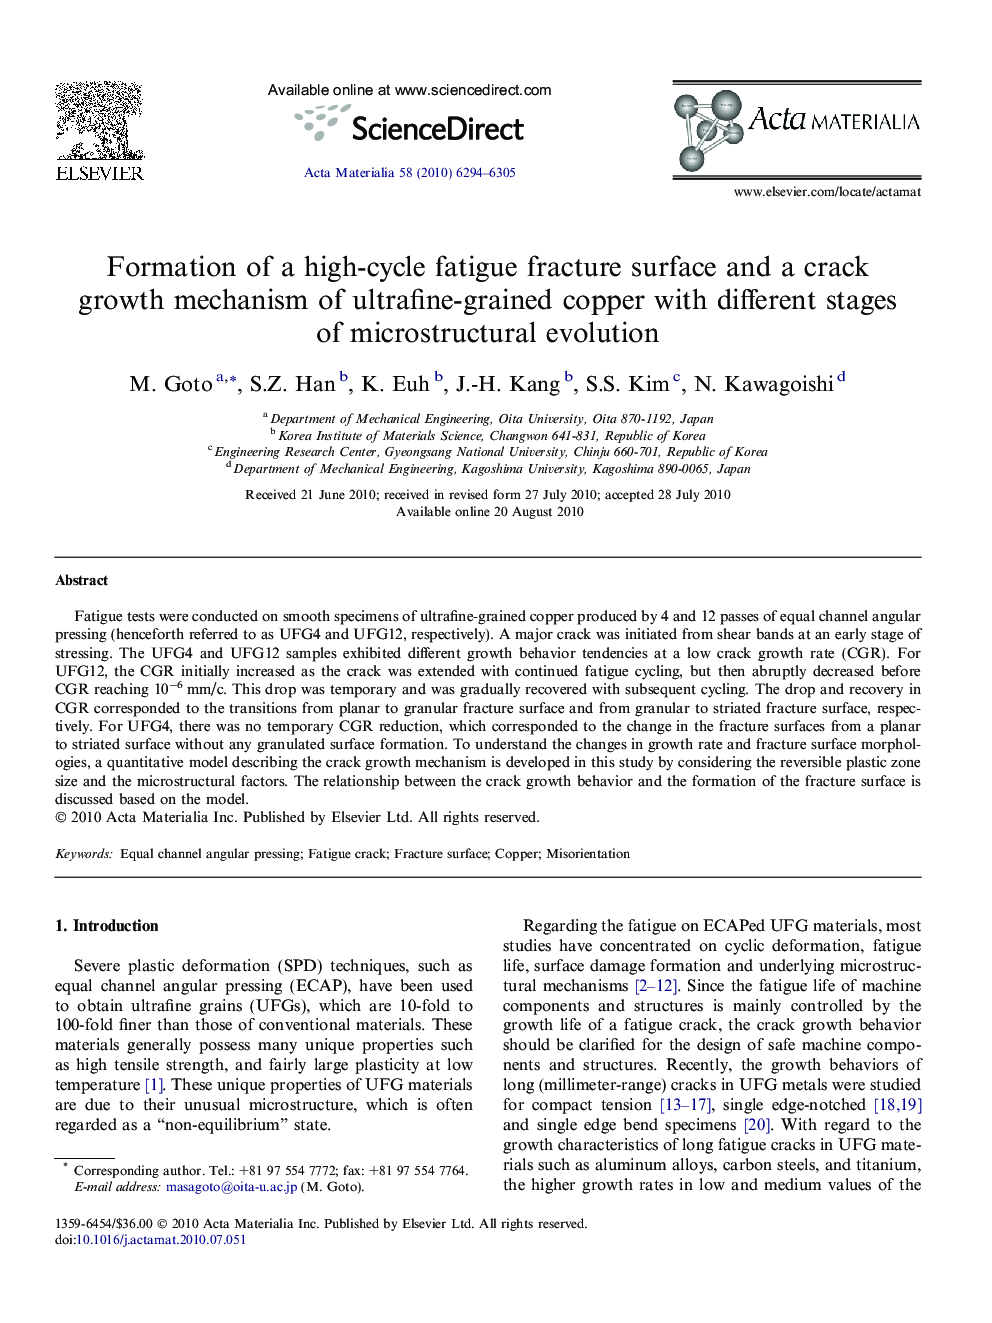 Formation of a high-cycle fatigue fracture surface and a crack growth mechanism of ultrafine-grained copper with different stages of microstructural evolution